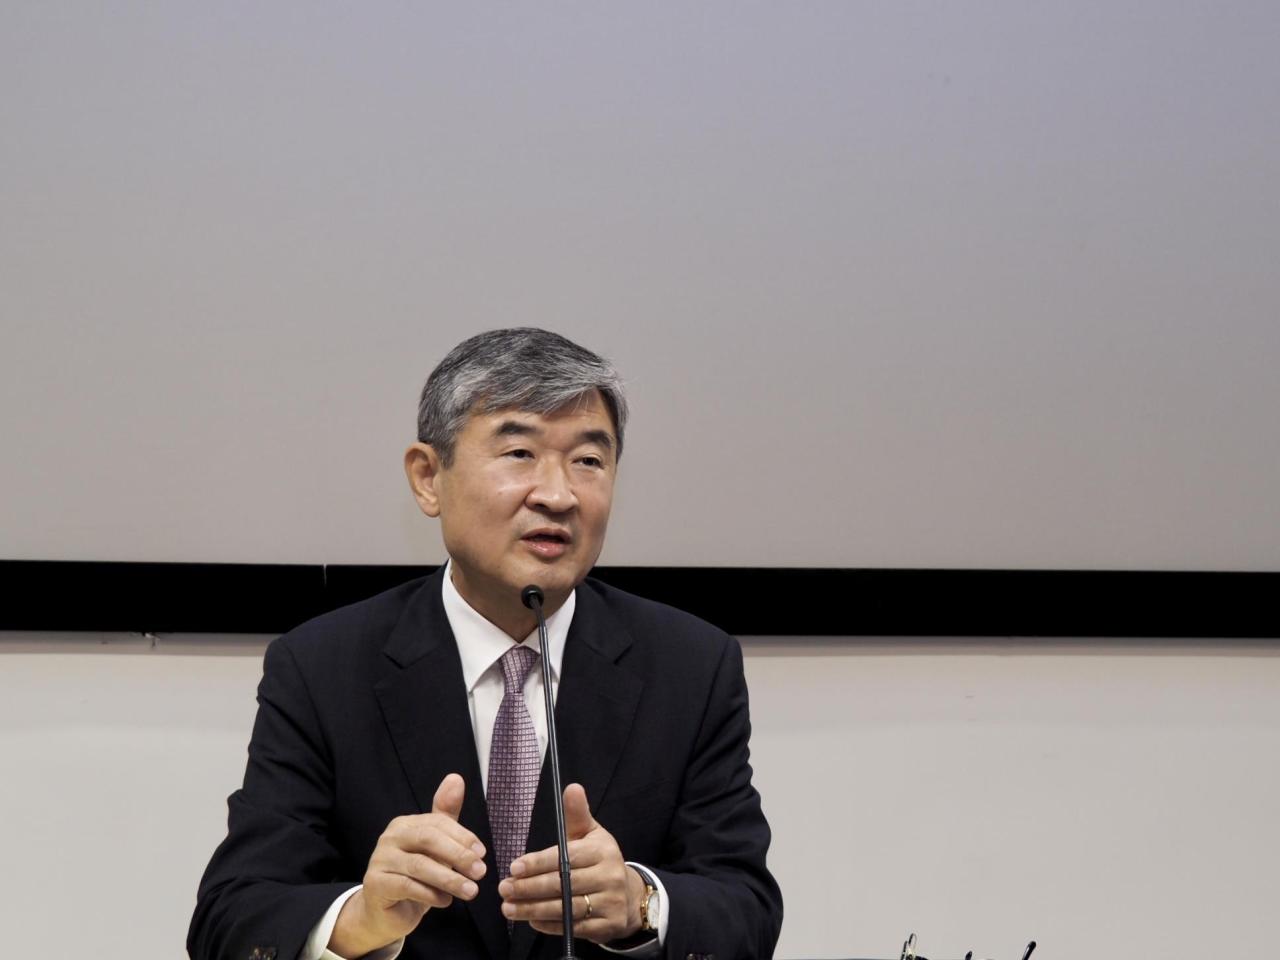 South Korean Ambassador to the United States Cho Tae-yong speaks during a press conference with South Korean correspondents at the South Korean culture center in Washington on Monday. (Yonhap)